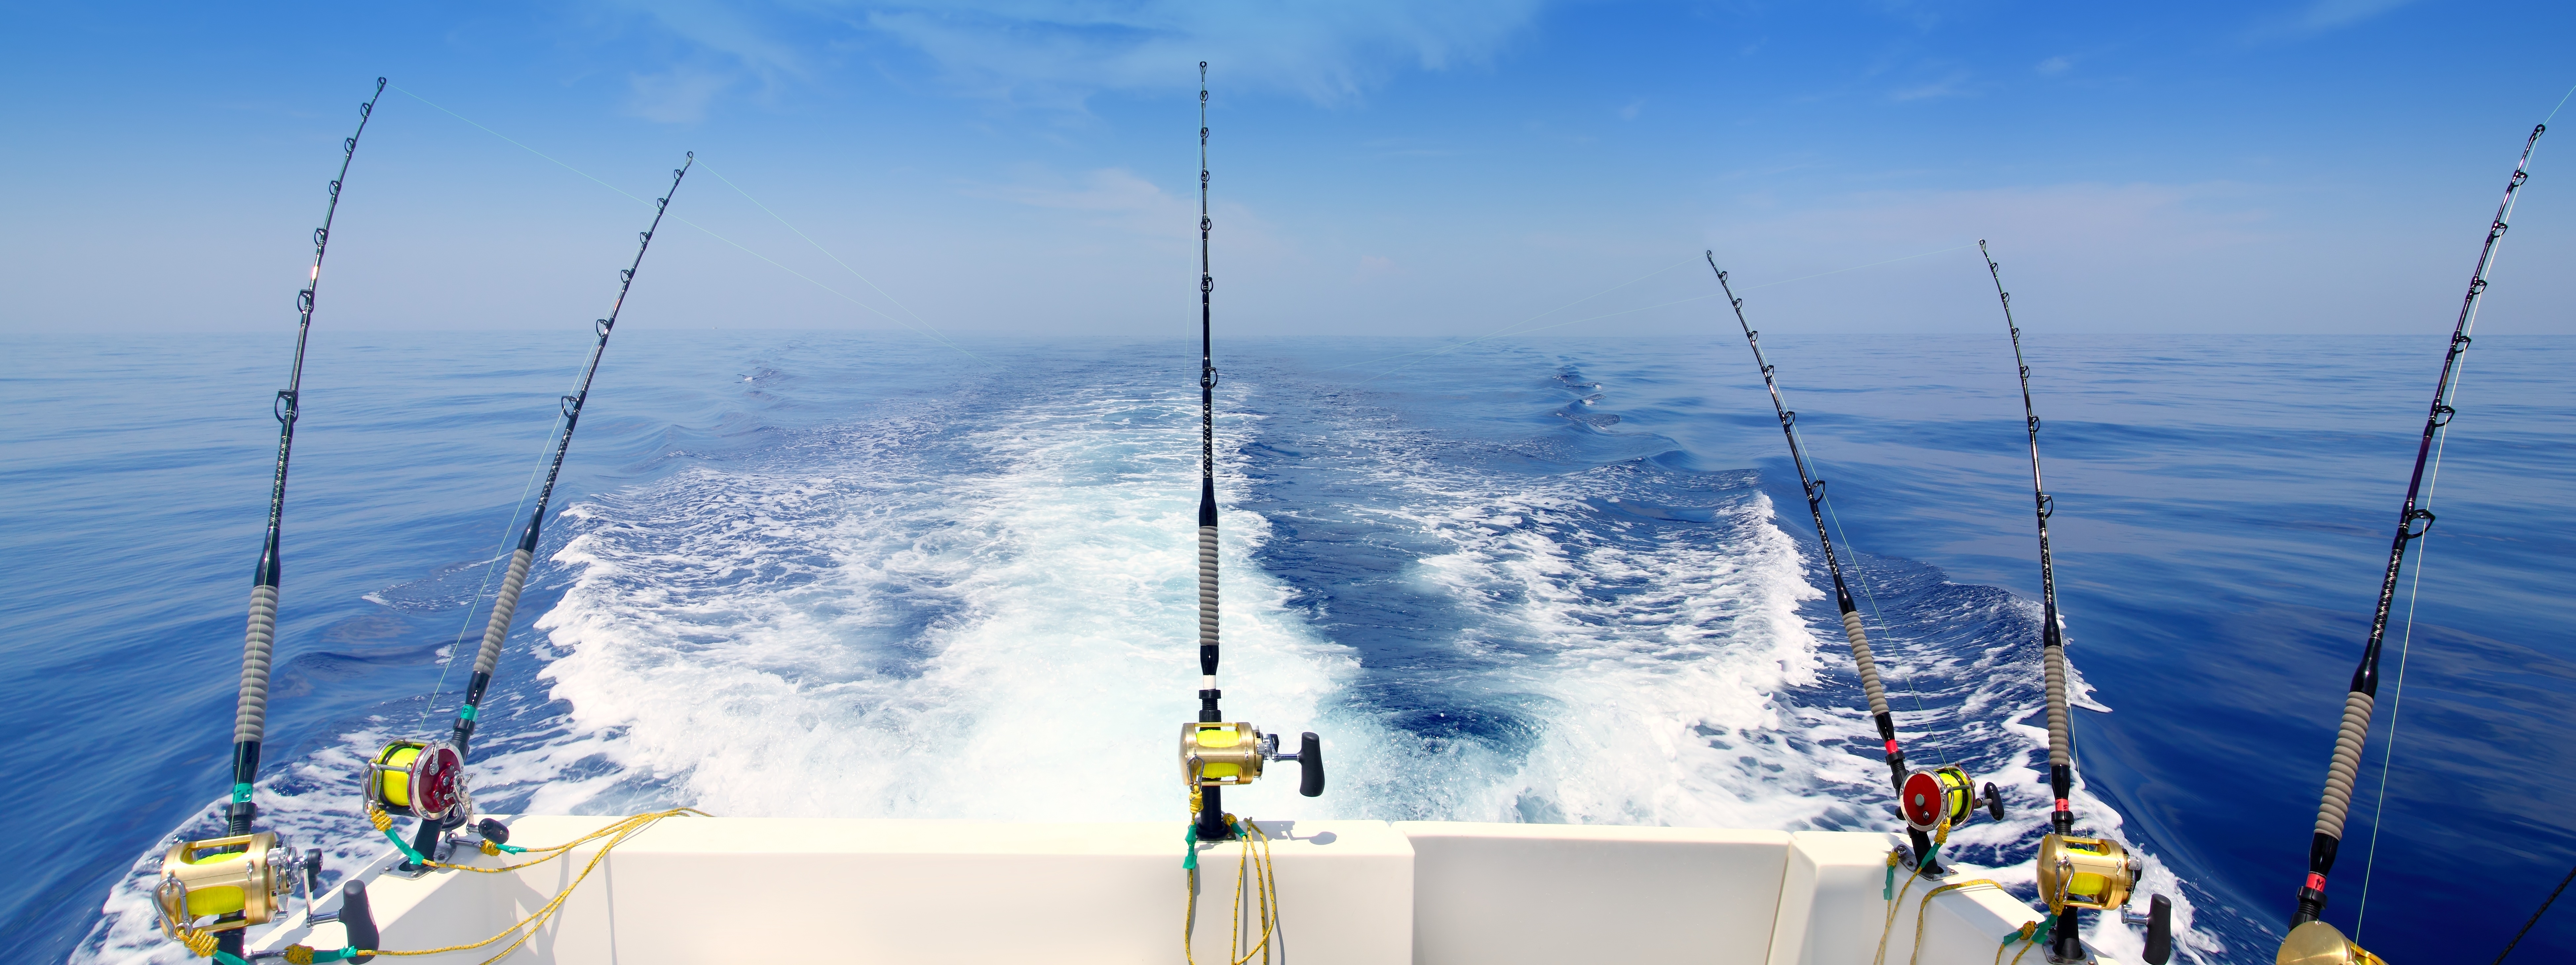 Deep Sea Fishing Boat Manufacturers Pictures to pin on Pinterest